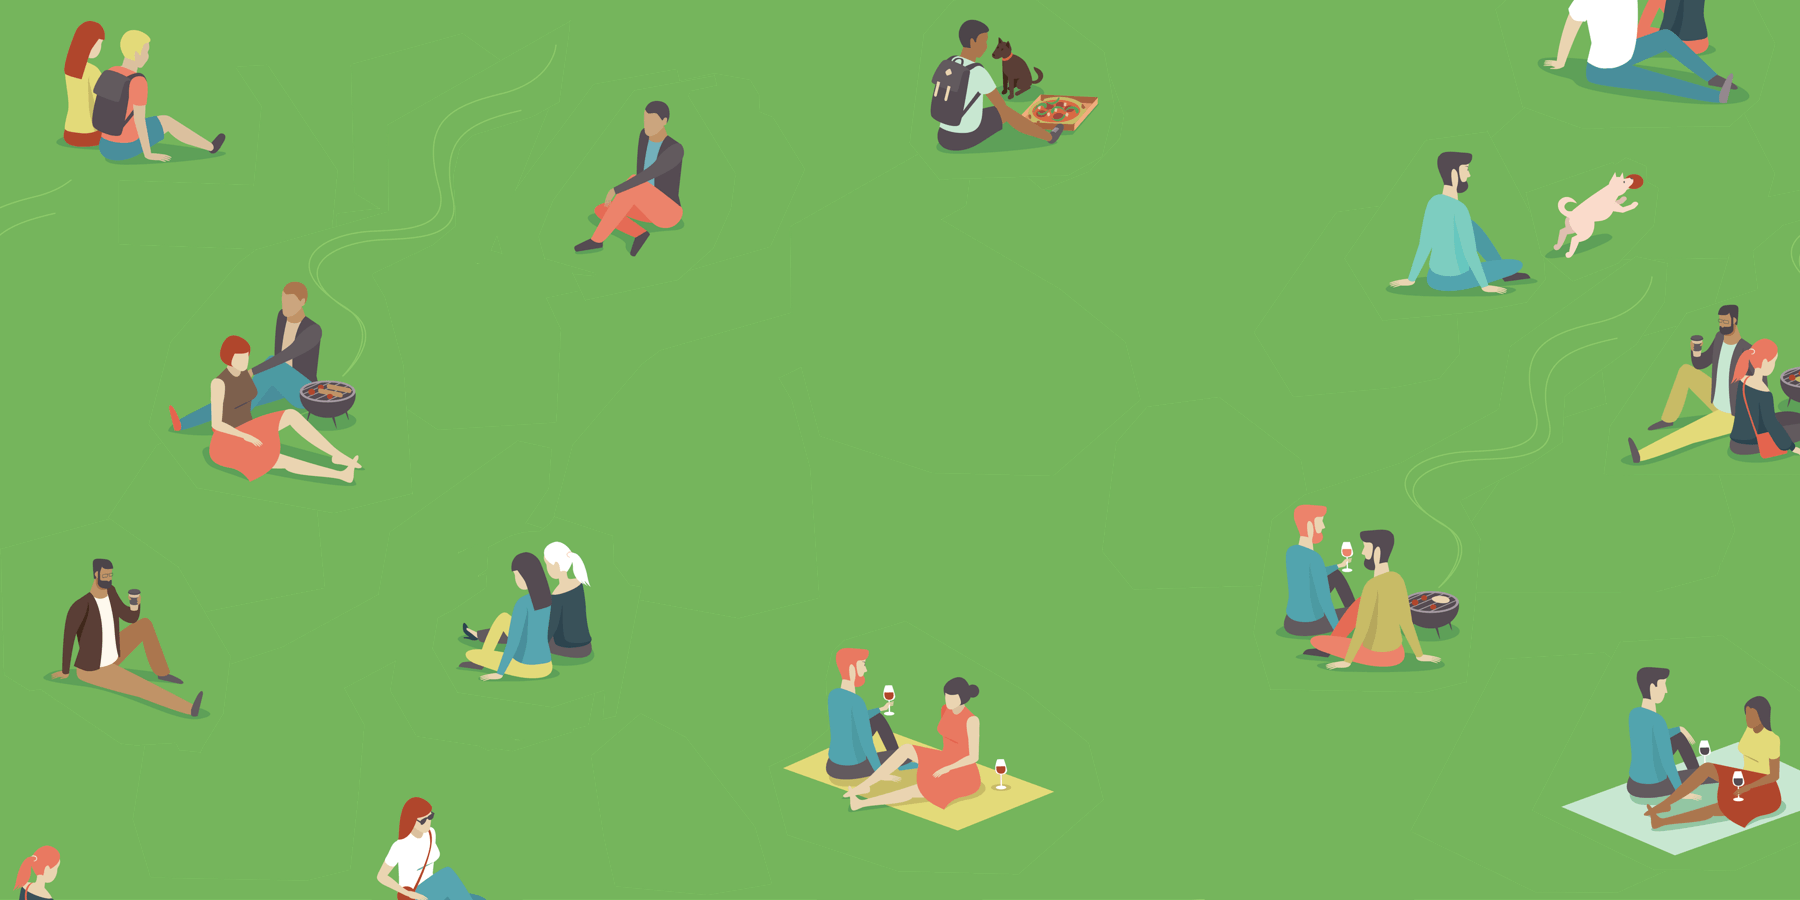 Outdoor drinking in the park illustration